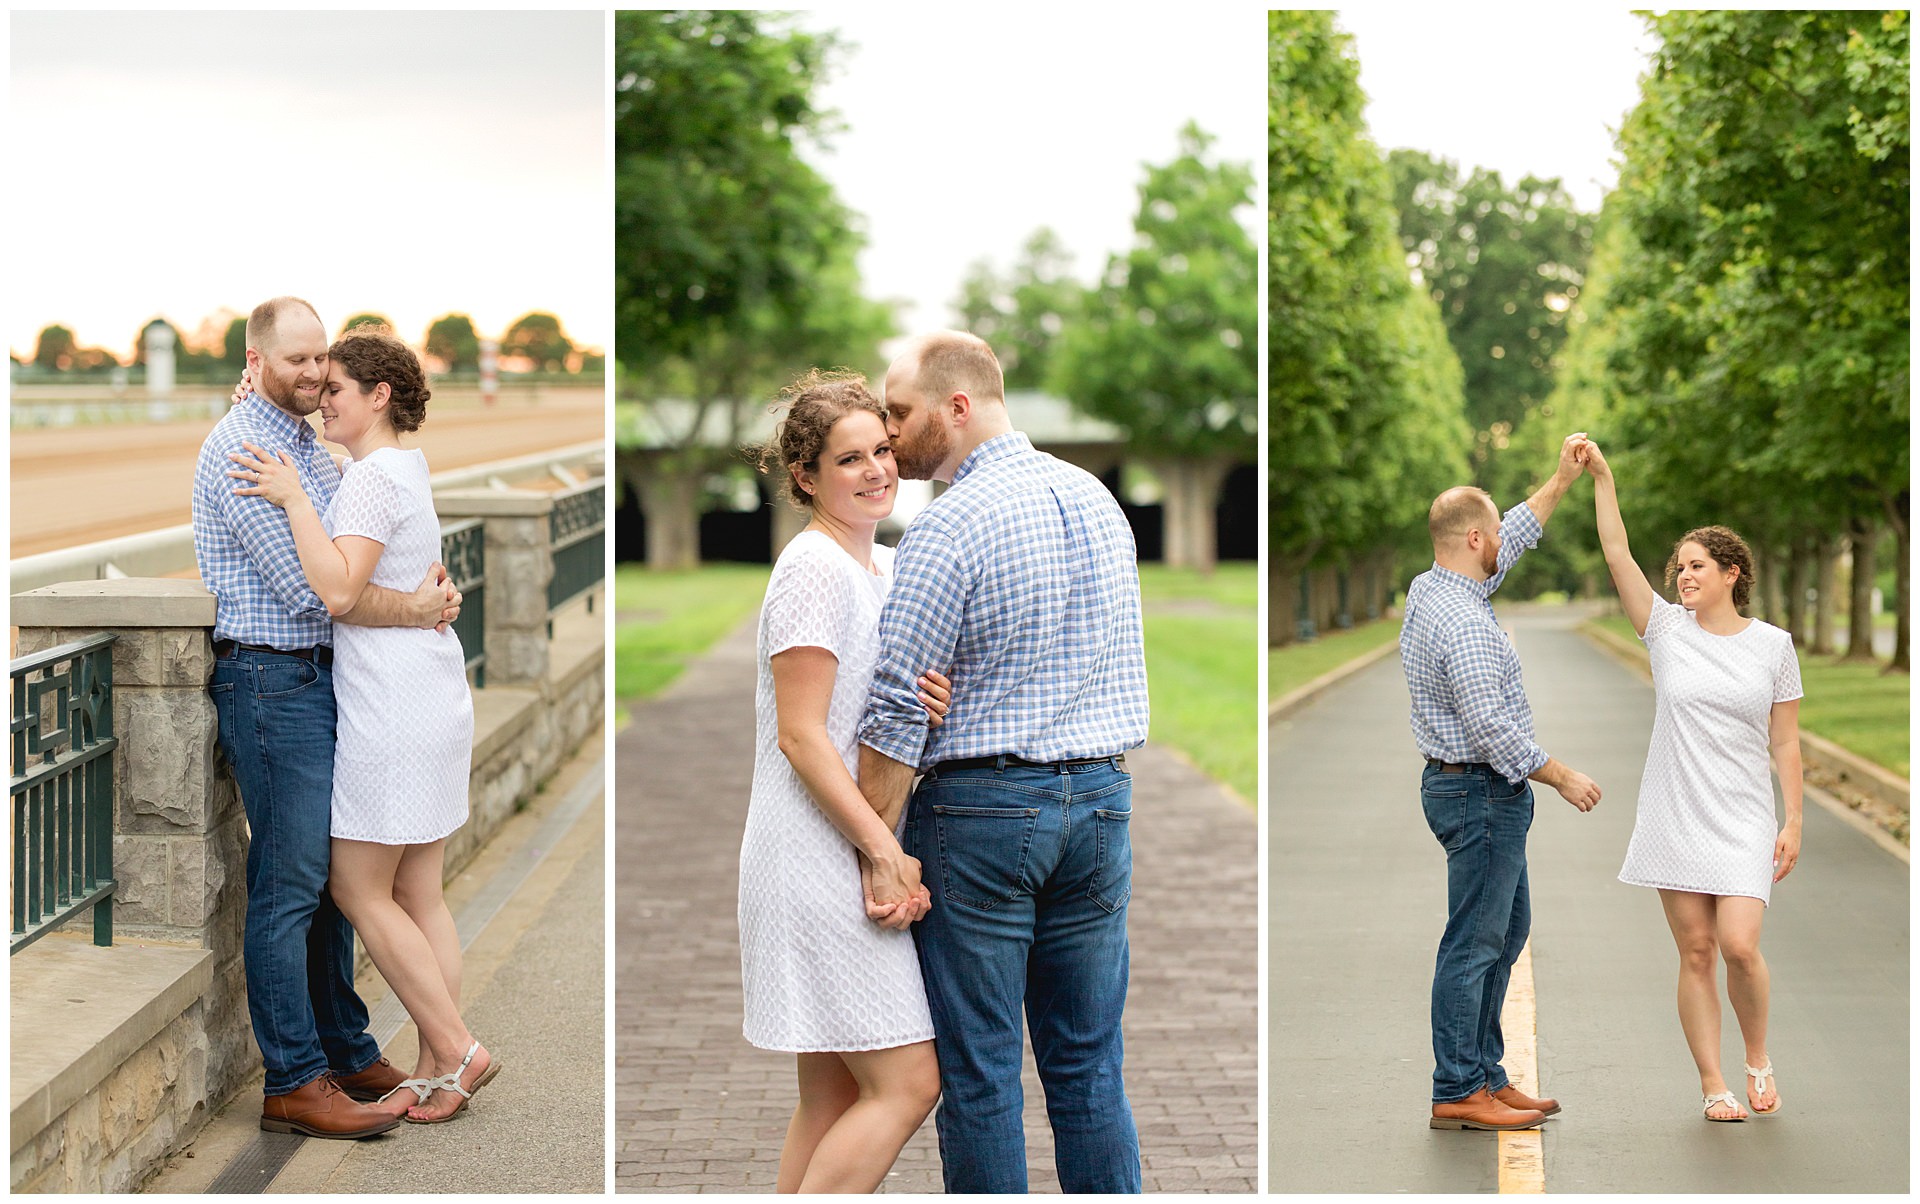 Summer engagement session at Keeneland Racecourse in Lexington, KY